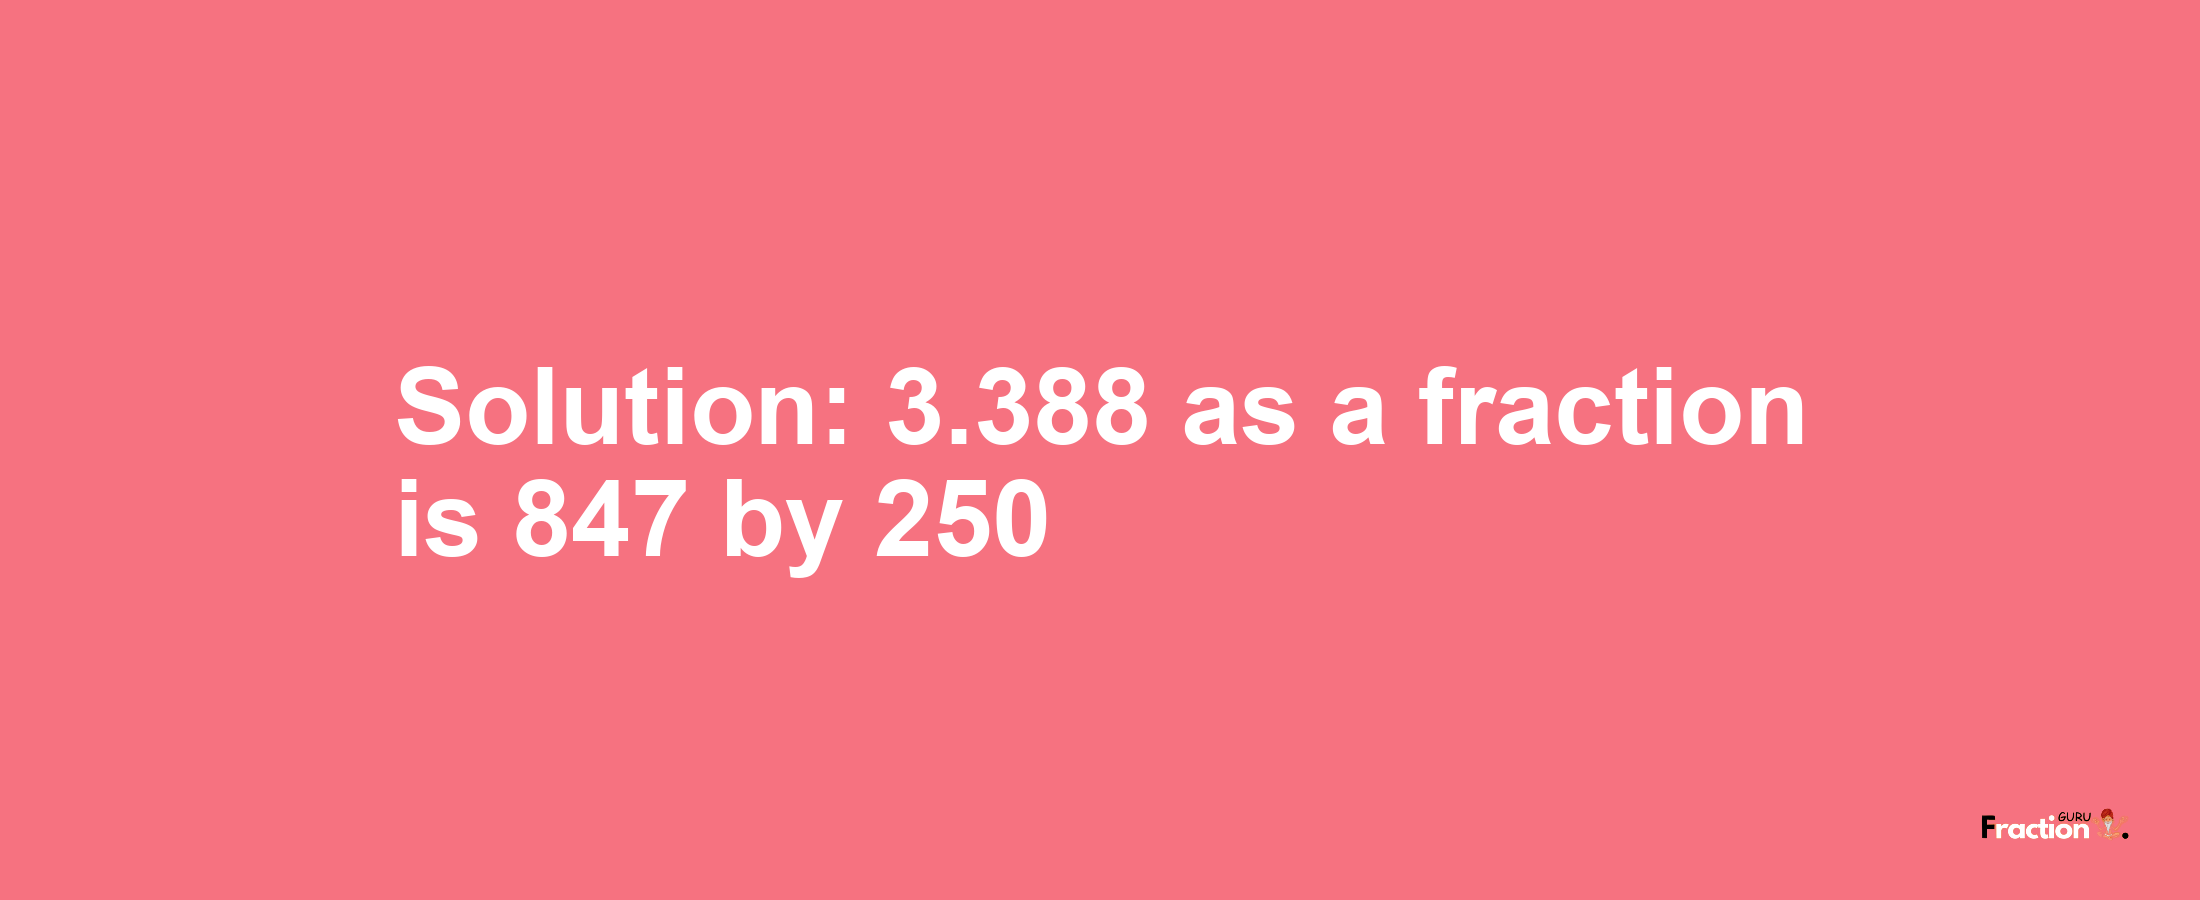 Solution:3.388 as a fraction is 847/250